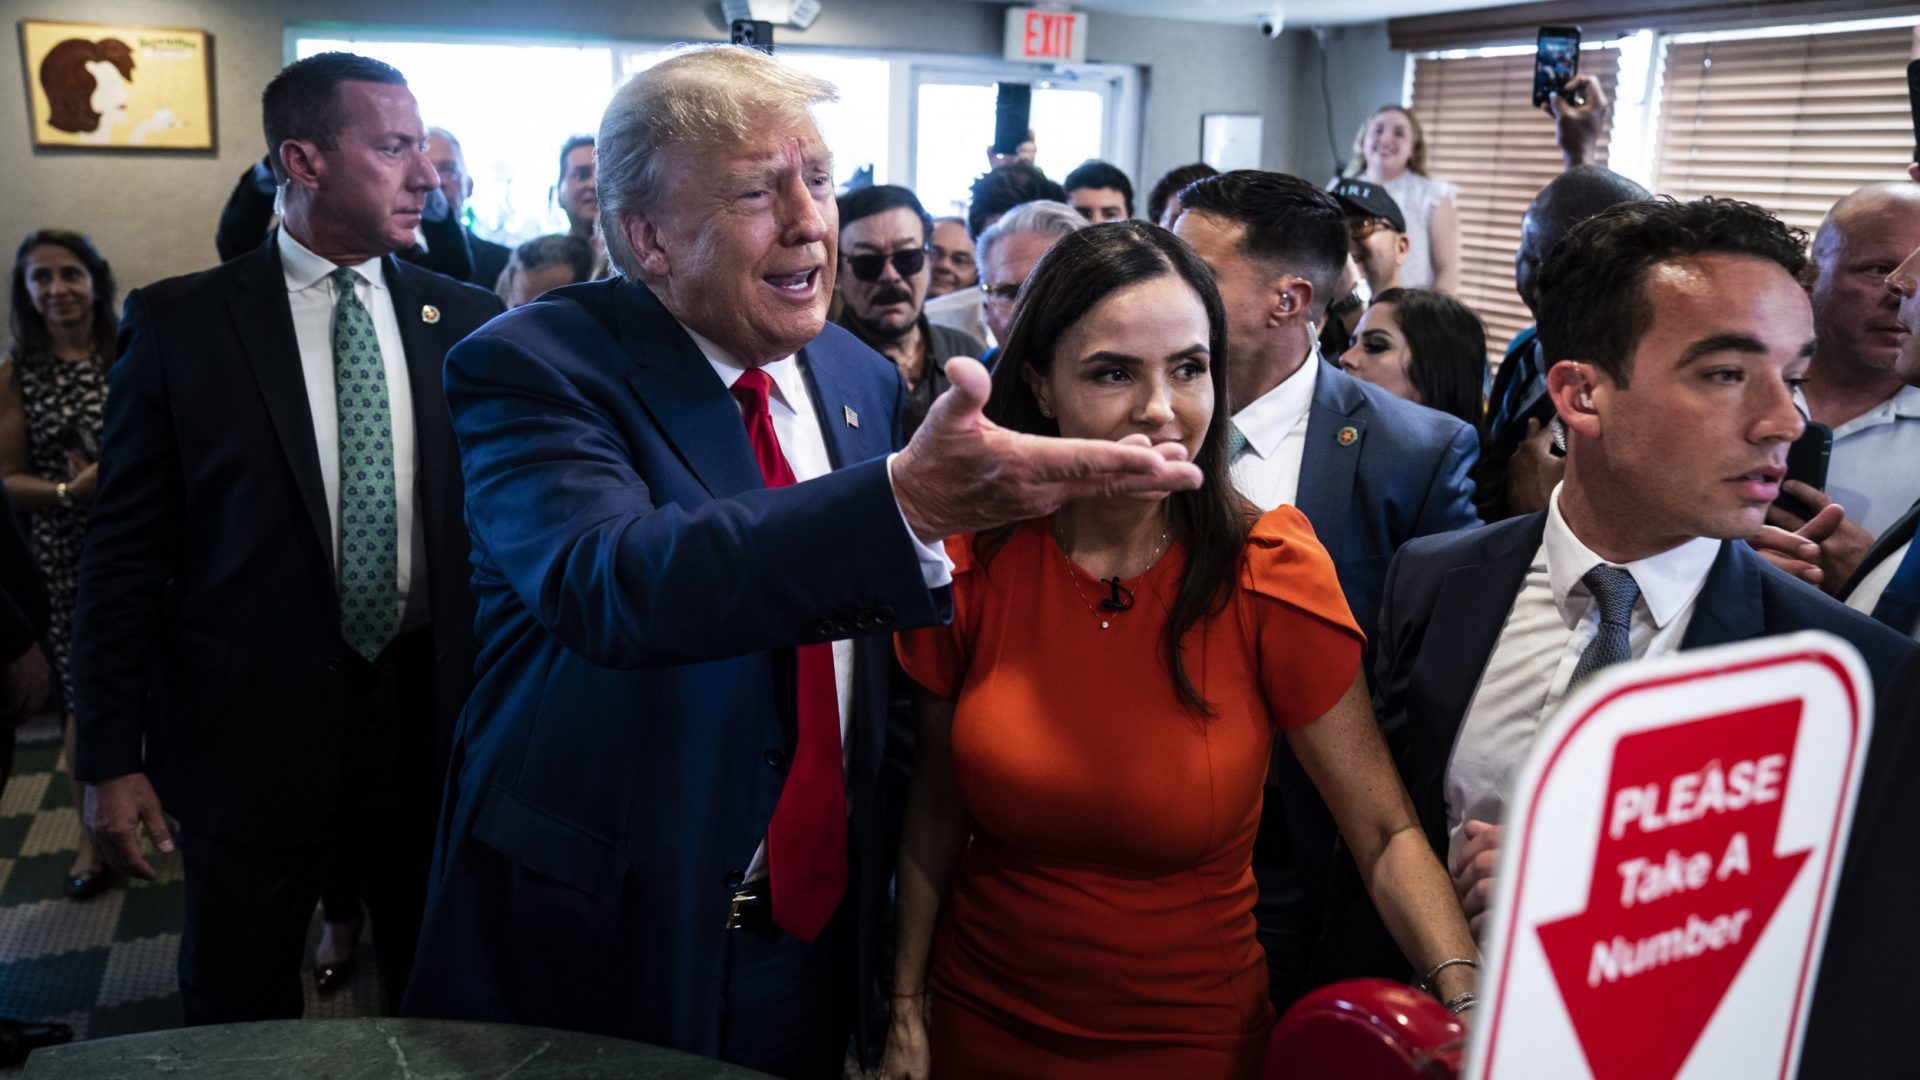 Donald Trump greets supporters and patrons at Versailles Cuban Restaurant in Miami, minutes after pleading not guilty to federal charges, June 13. Photo: Jabin Botsford/The Washington Post/Getty